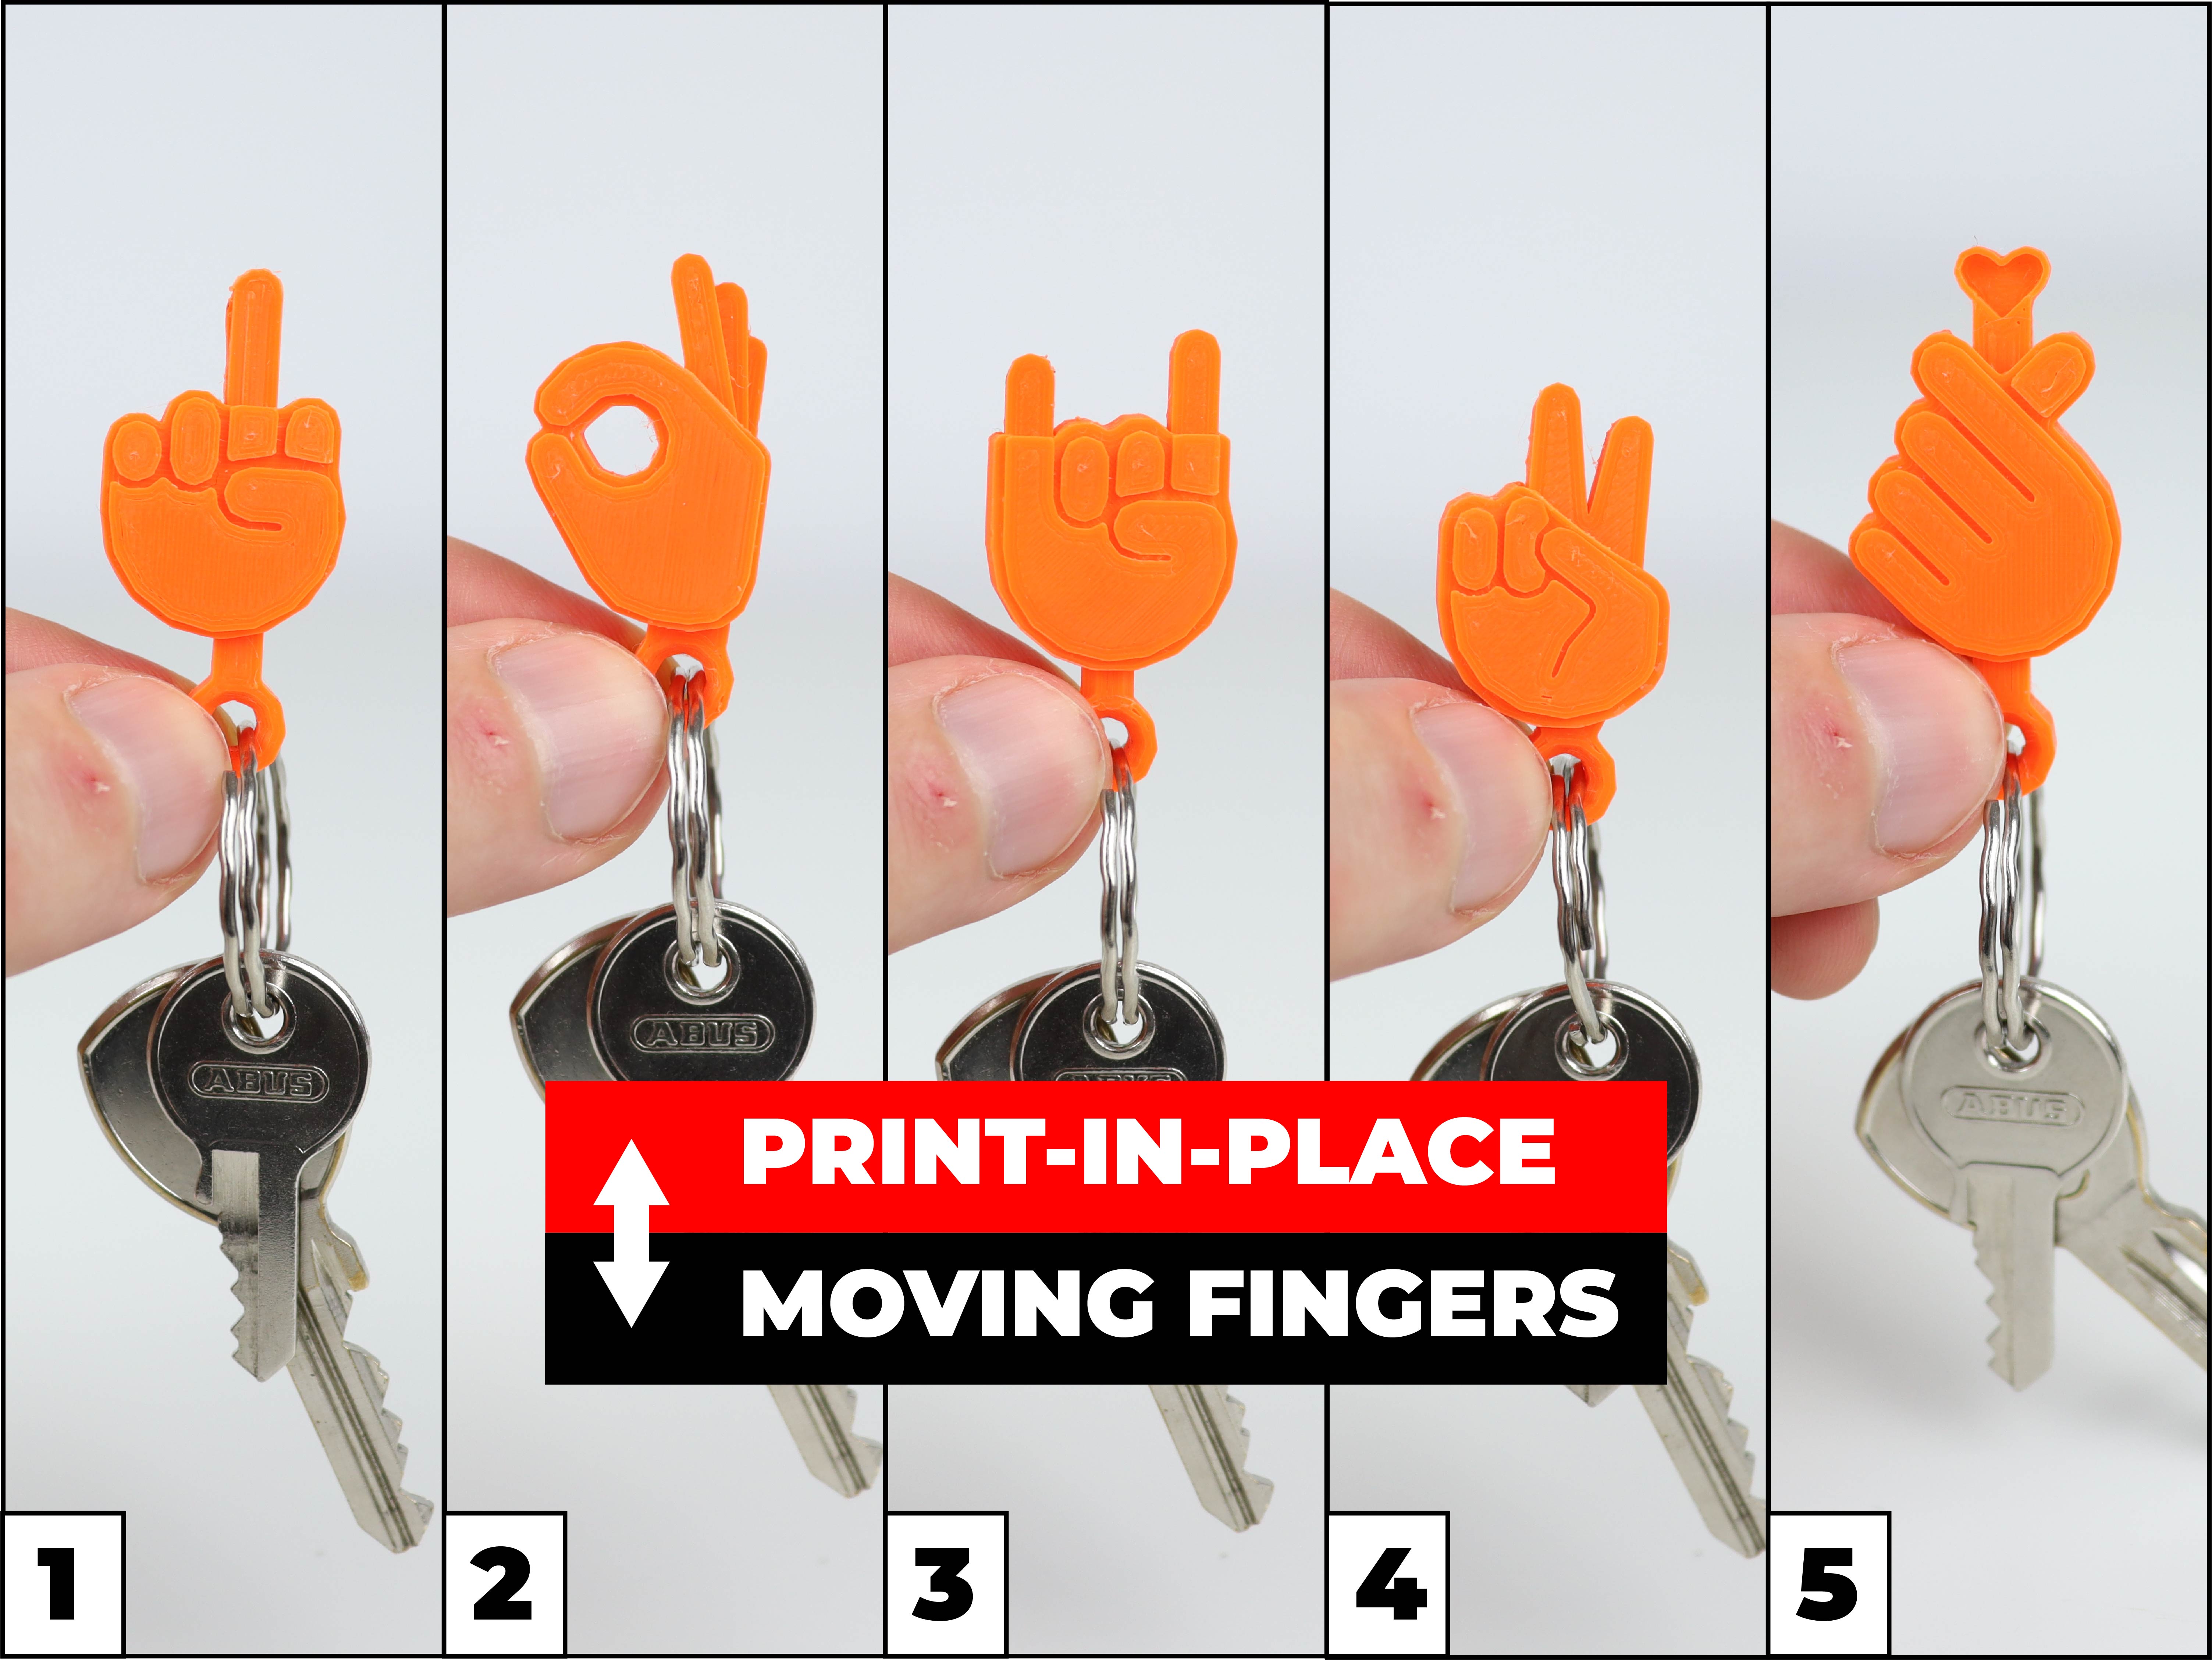 PRINT-IN-PLACE MOVING FINGERS KEYCHAINS